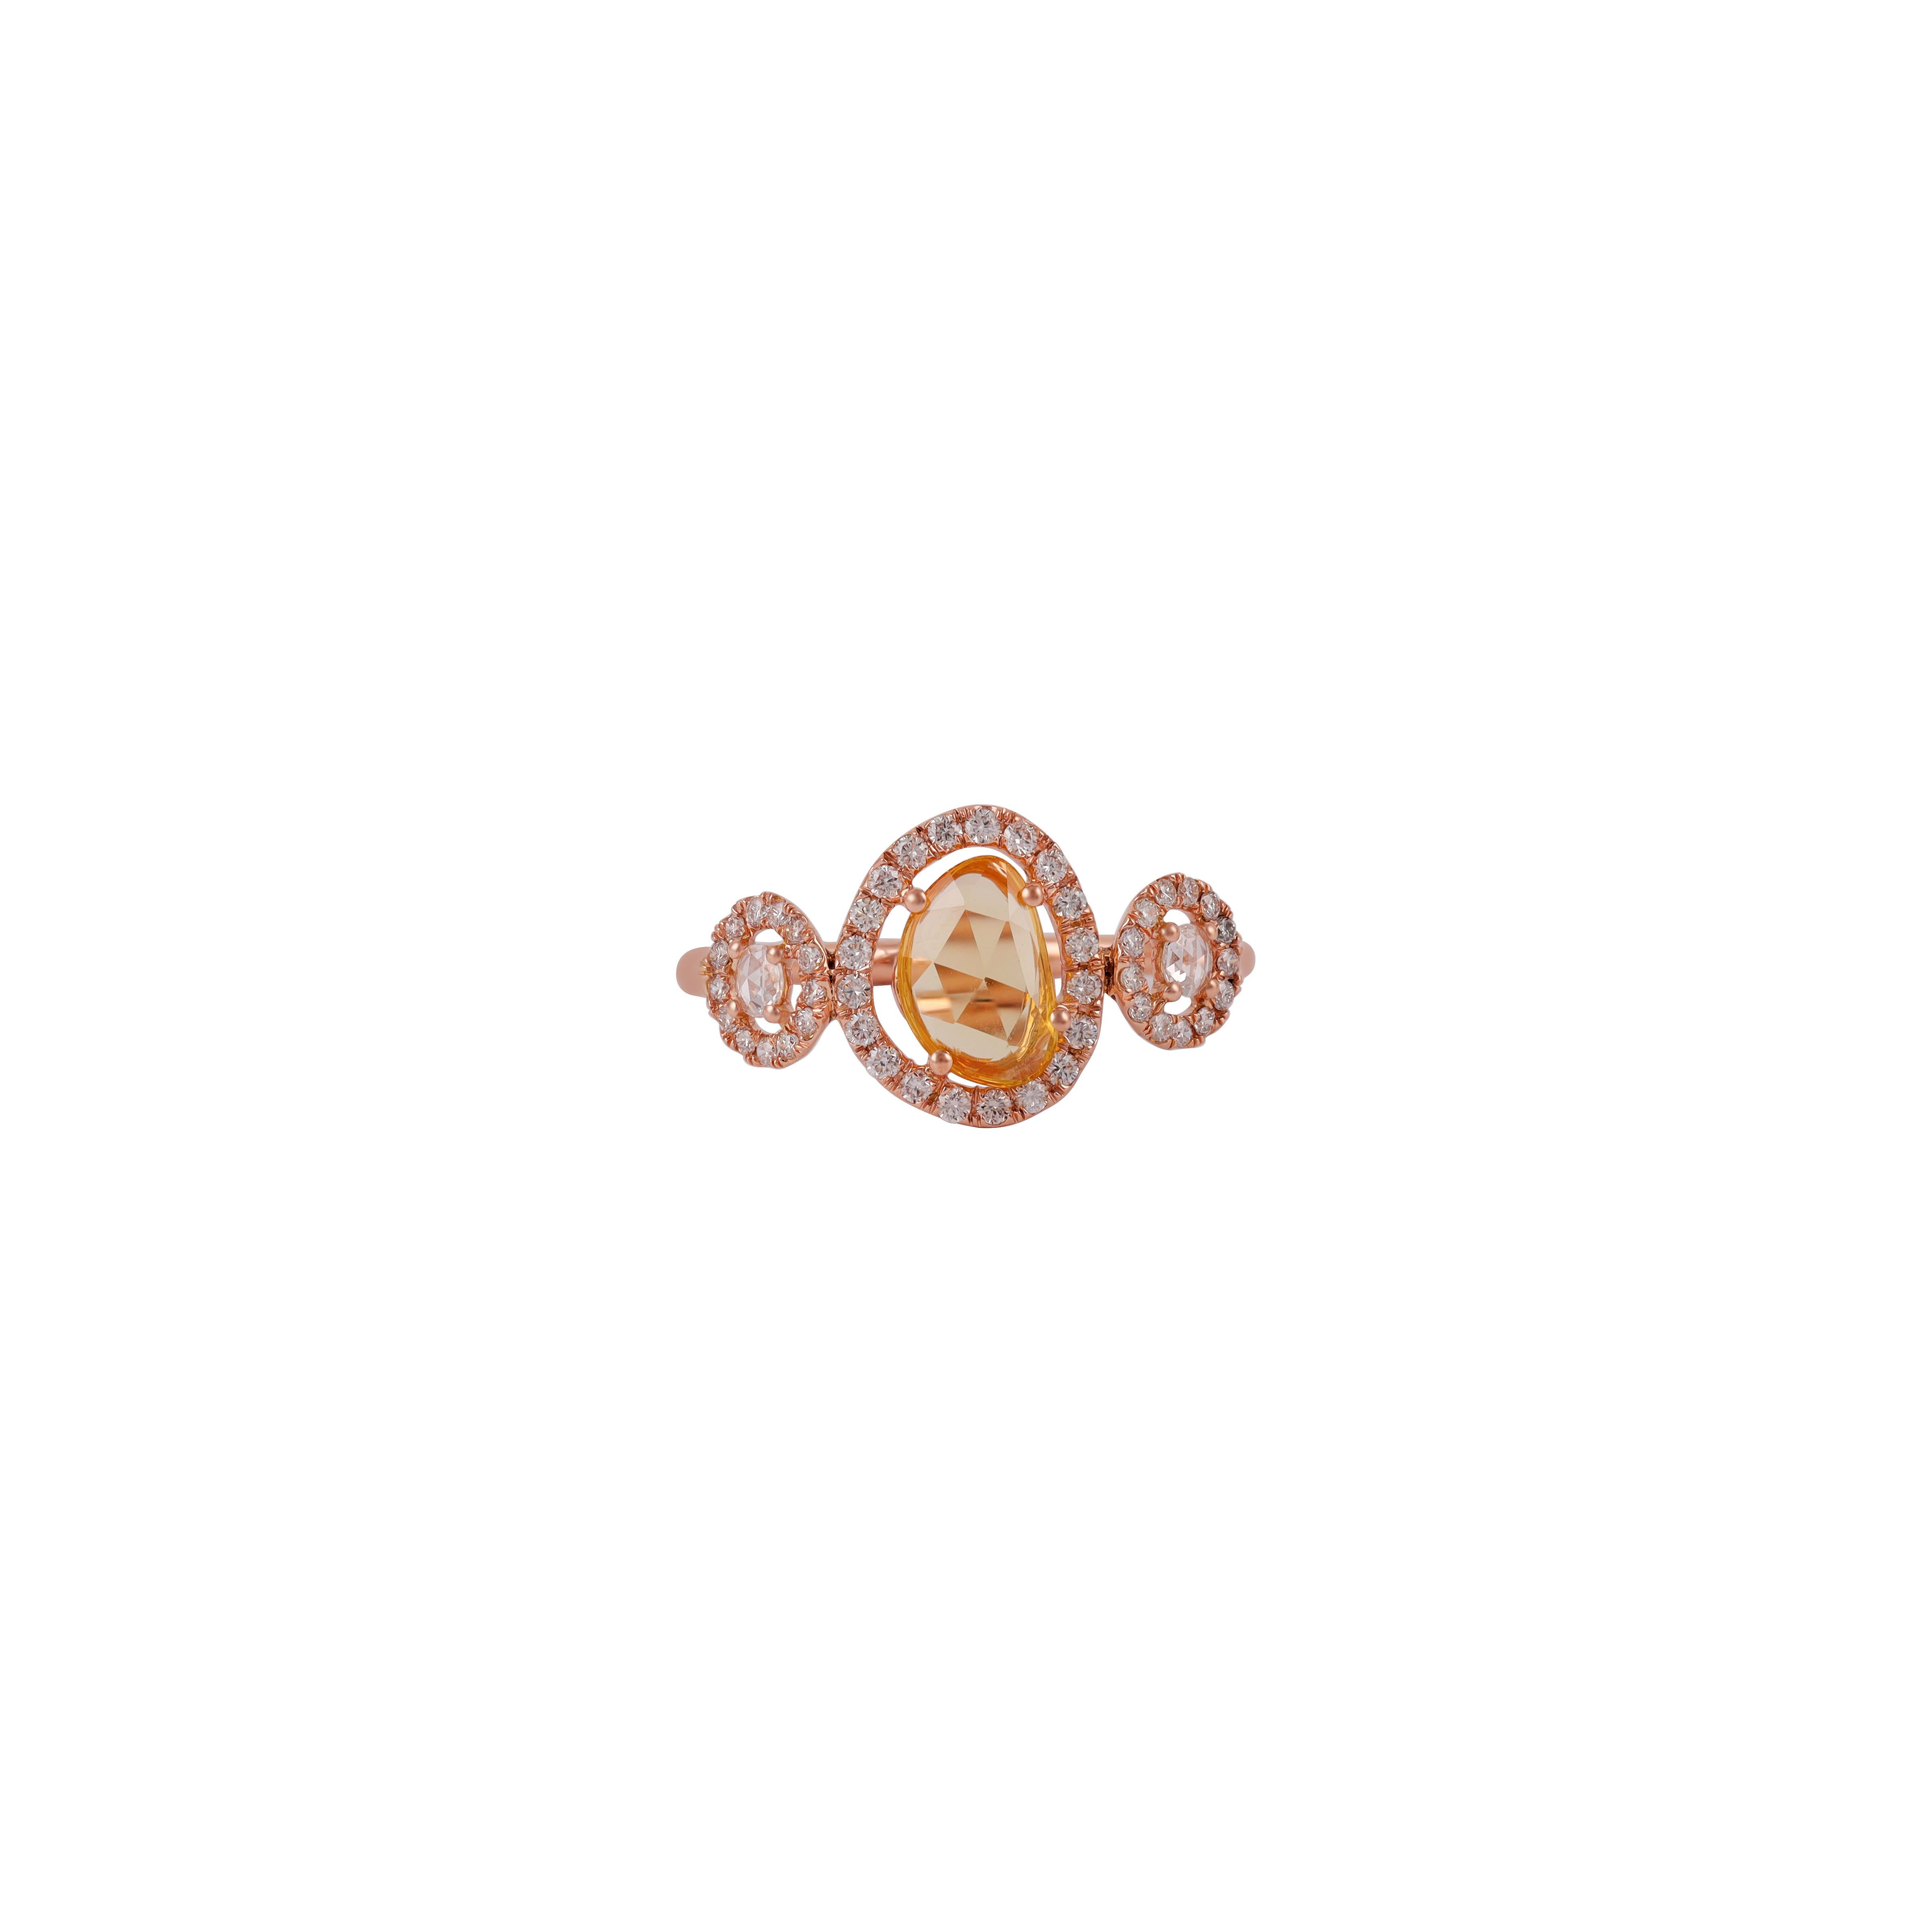 Yellow Sapphire surrounded by brilliant round cut Diamond Ring 
1 Uneven shape Sapphire 0.80 CTS
 Both side 2  Rose cut  Diamonds 0.07 CTS
46 Round brilliant cut diamonds 0.29 CTS
18 k Rose gold mounting 2.08 GMS
 

Custom Services
Resizing is